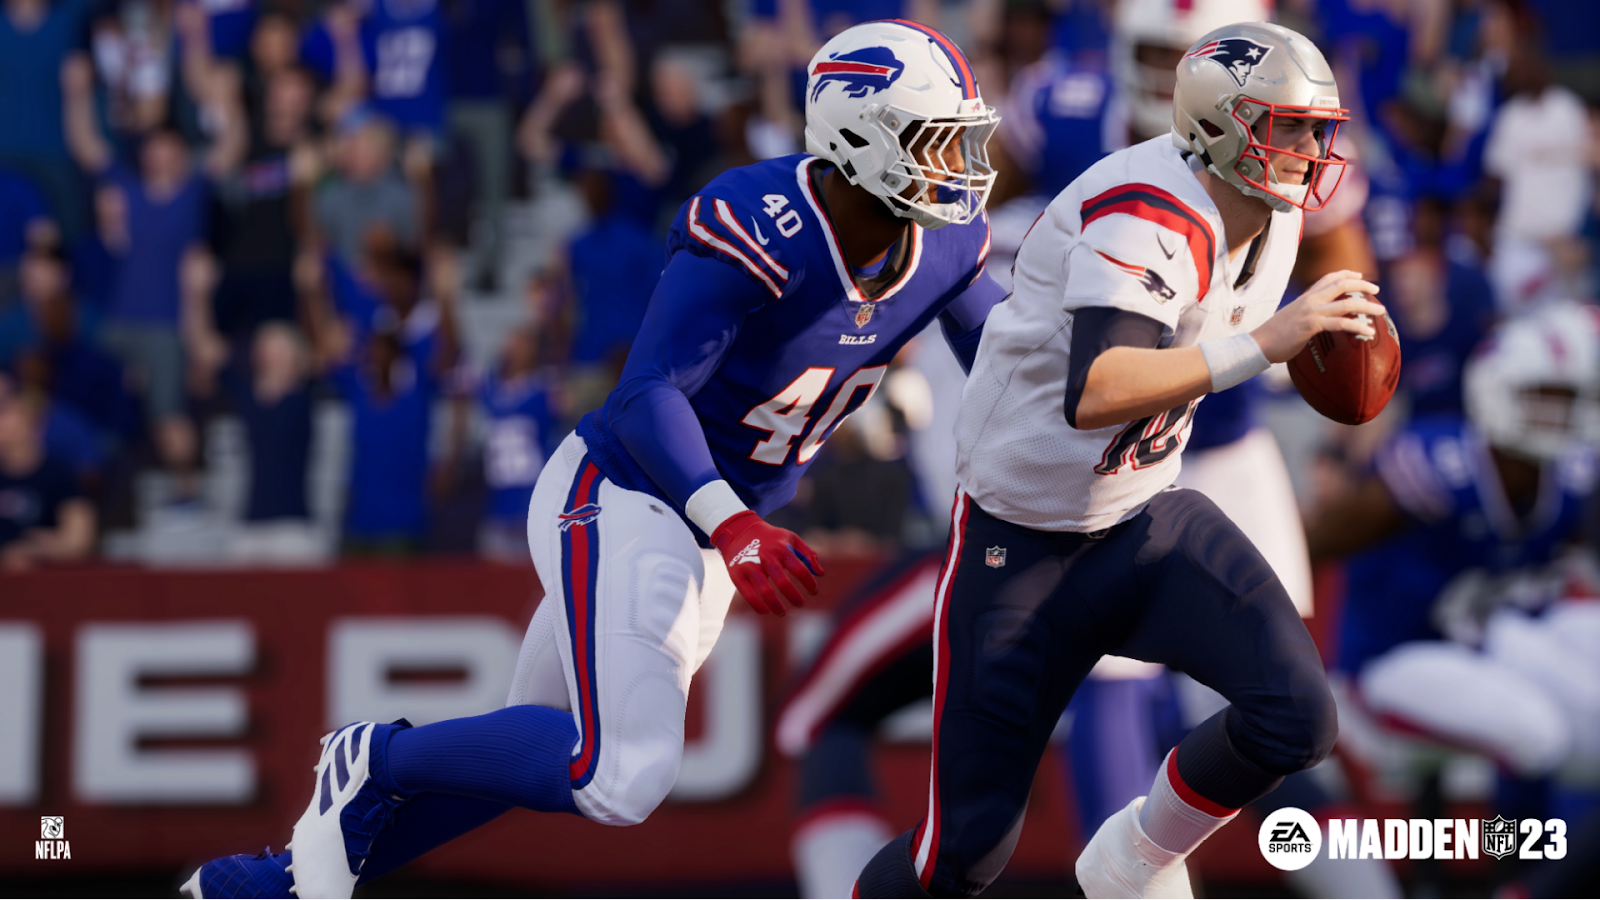 EA Sports determined to win gamers' consent with 'Madden NFL 23': On an afternoon in late July, Clint Oldenburg delivered the honest truth about Madden NFL 23.